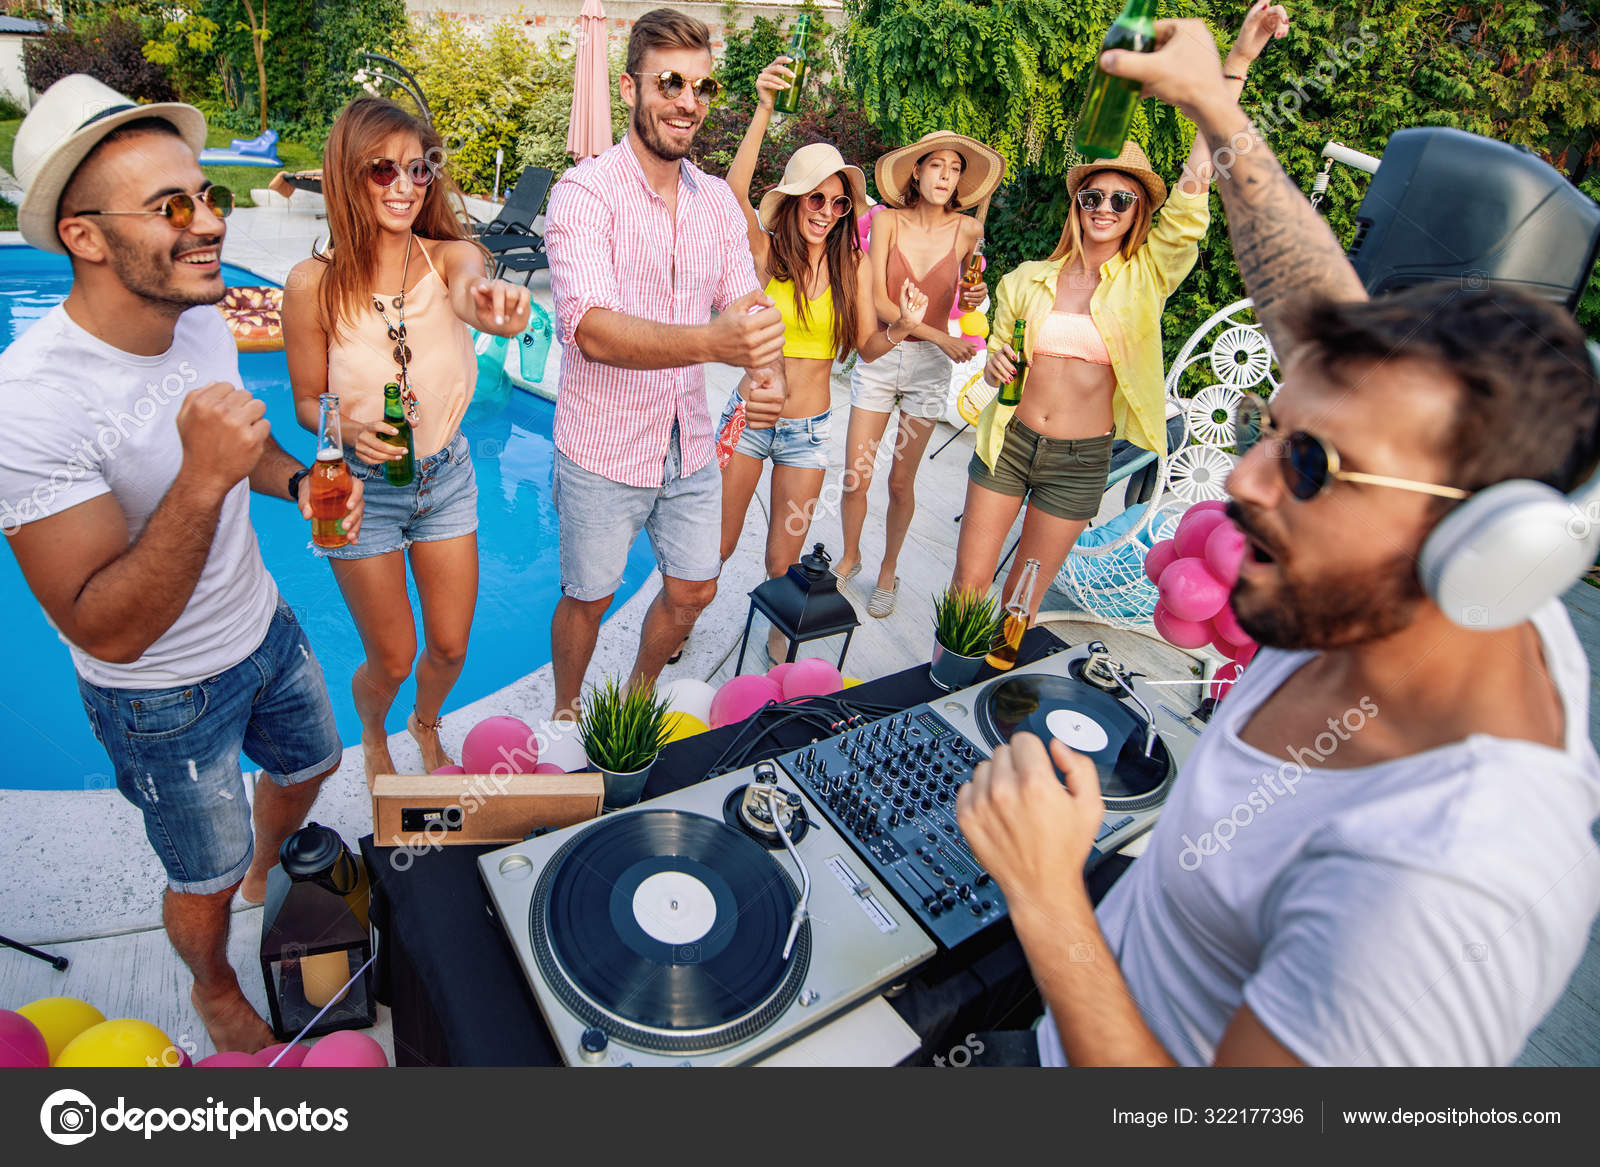 Playing Music Pool Party People Music Happiness Fun Concept Stock Photo ©Ivanko1980